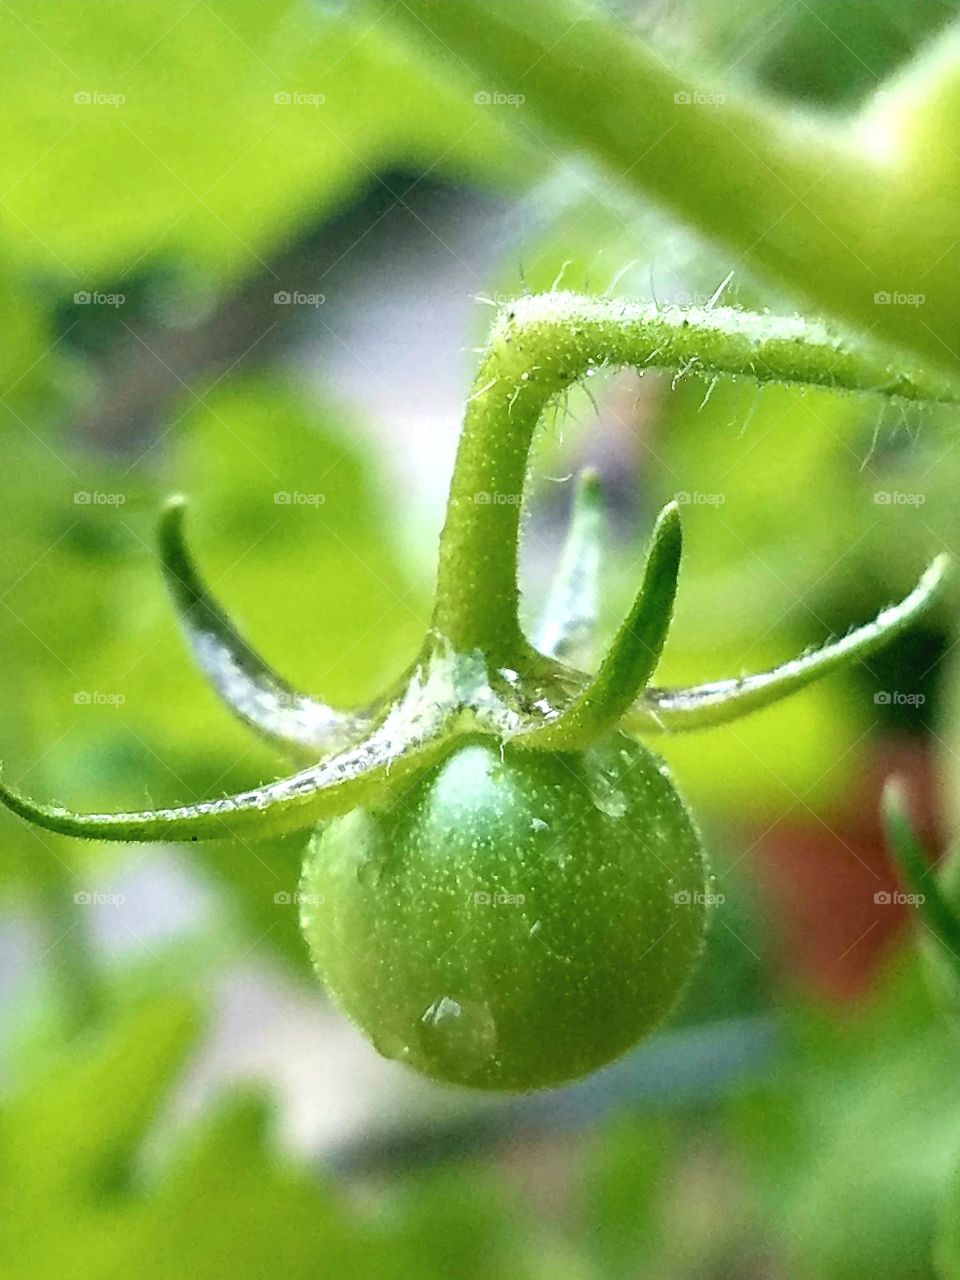 new green tomato on the vine after rainstorm